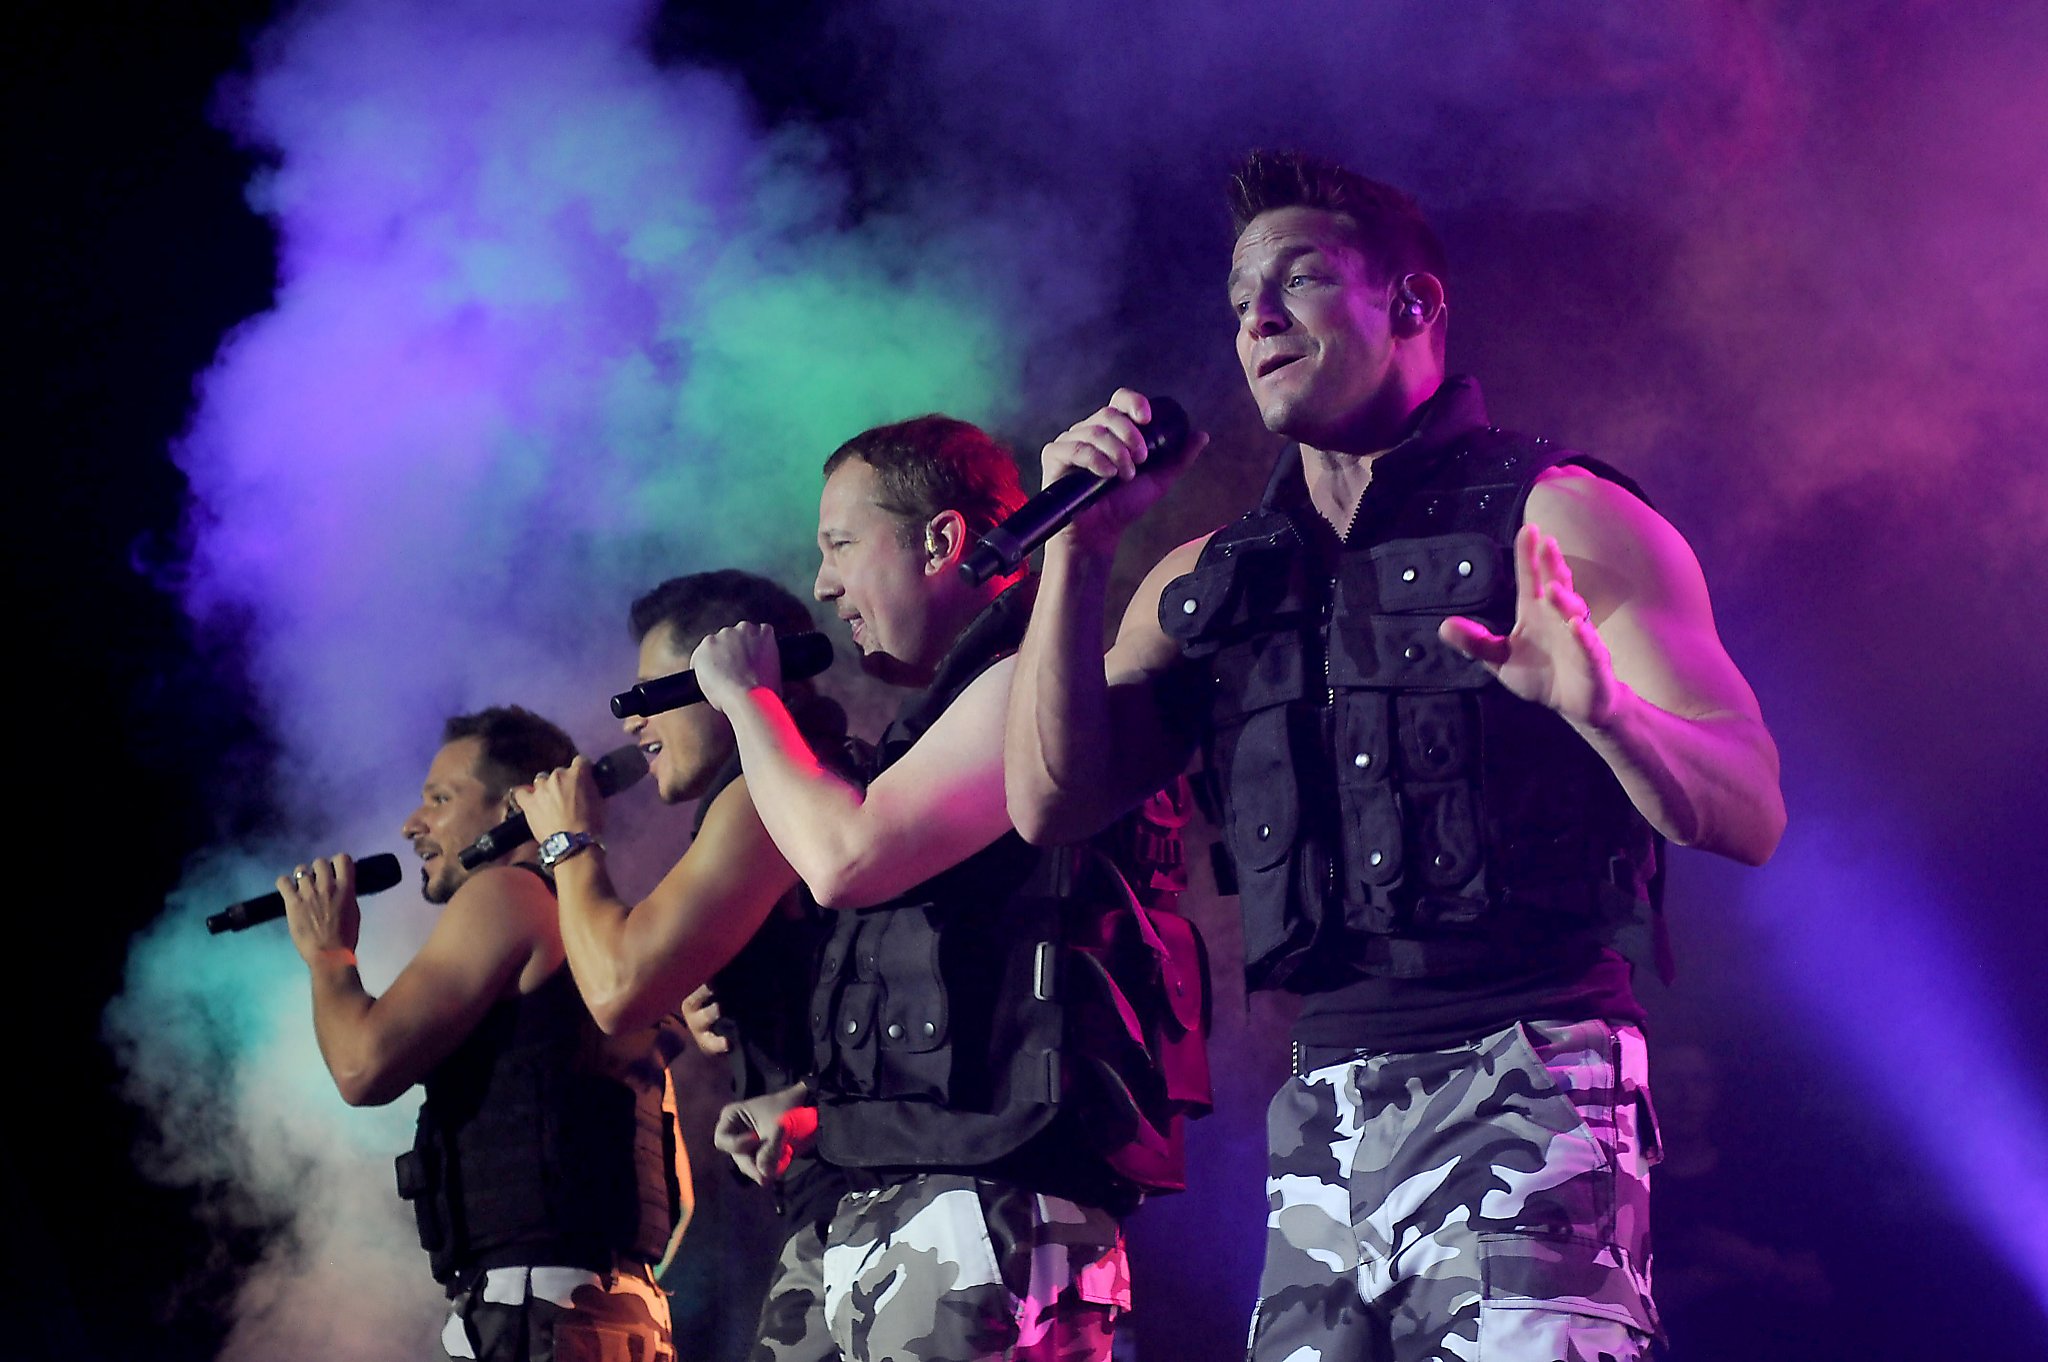 Boy band 98 Degrees and rockers the Beaches join performers at